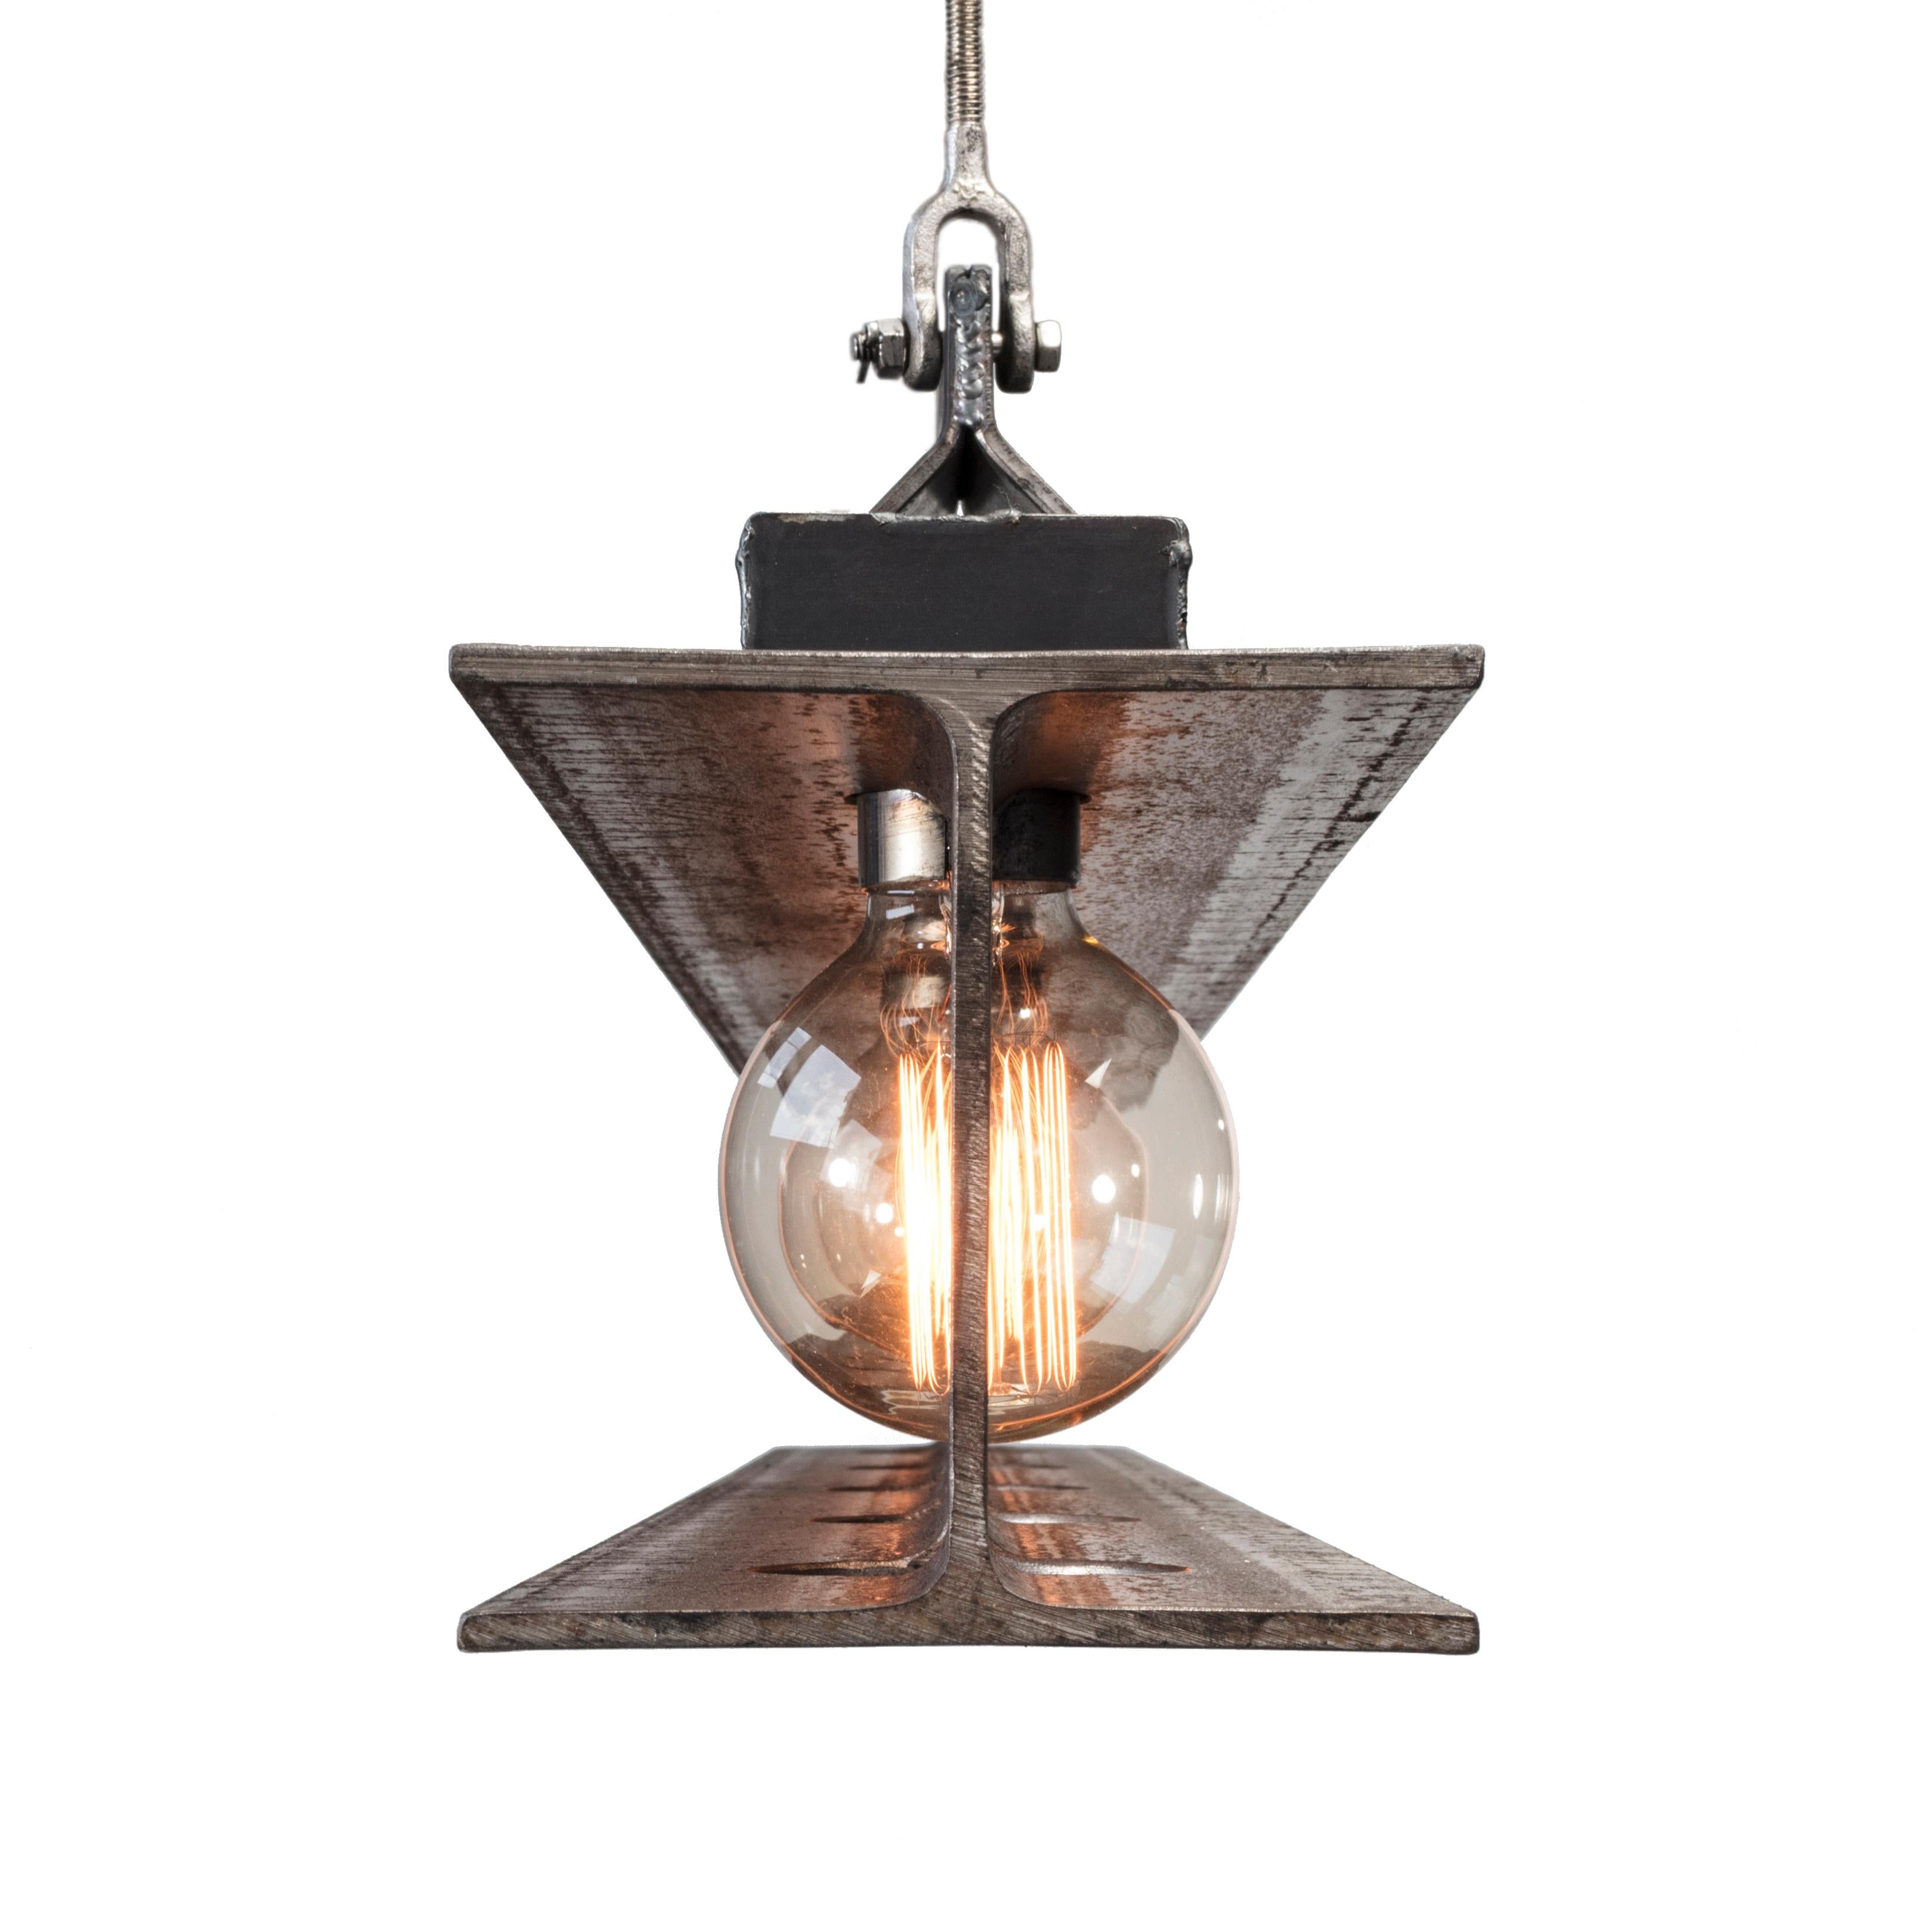 Industrial 'I-Beam Linear Pendant' by Basile Built - 2700K Soft White - Limited Edition  For Sale